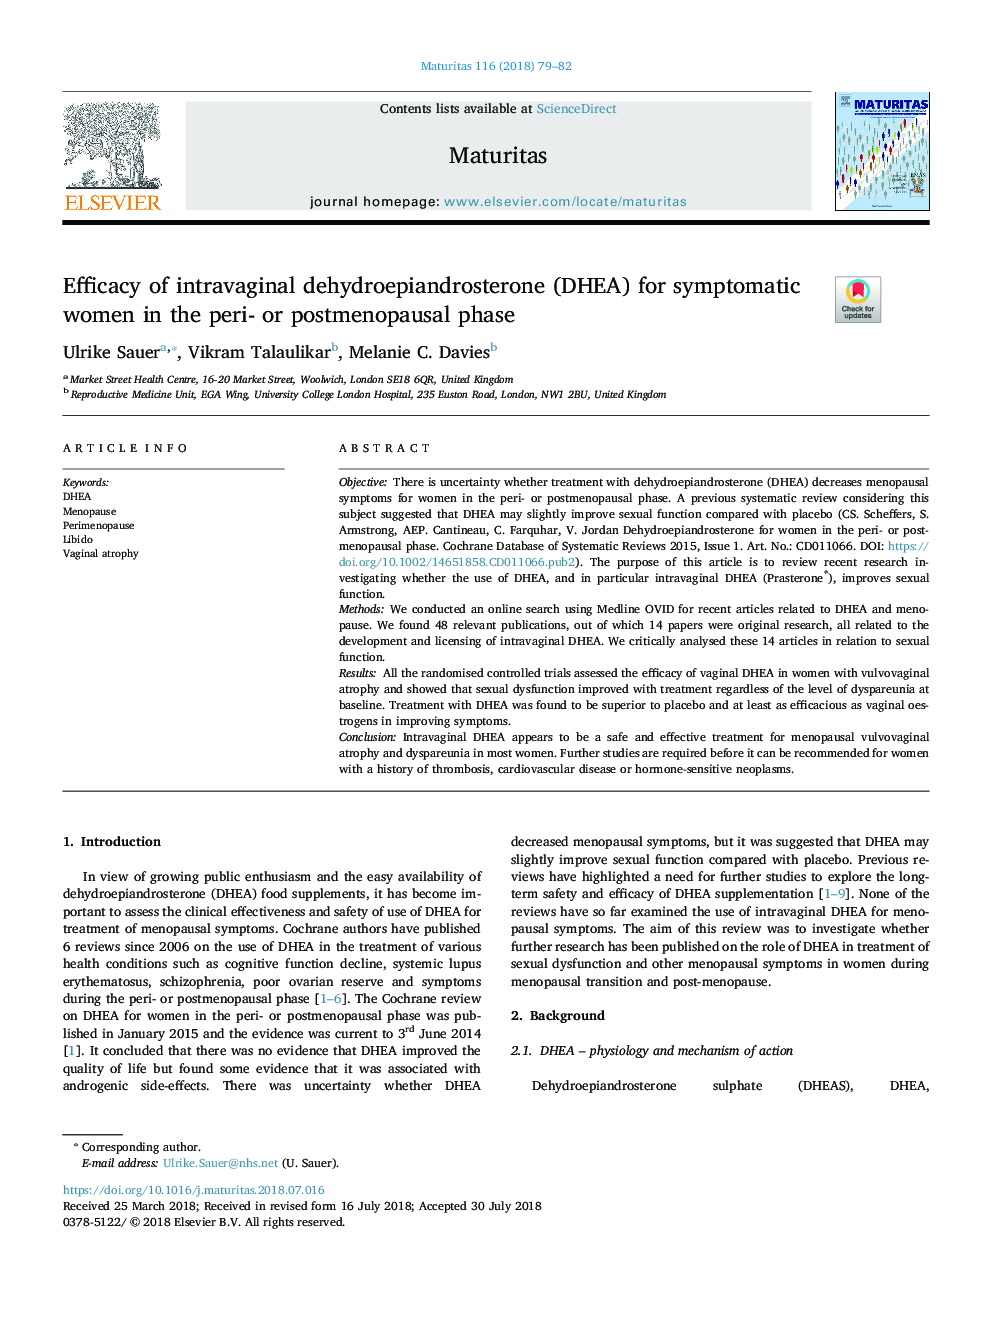 Efficacy of intravaginal dehydroepiandrosterone (DHEA) for symptomatic women in the peri- or postmenopausal phase